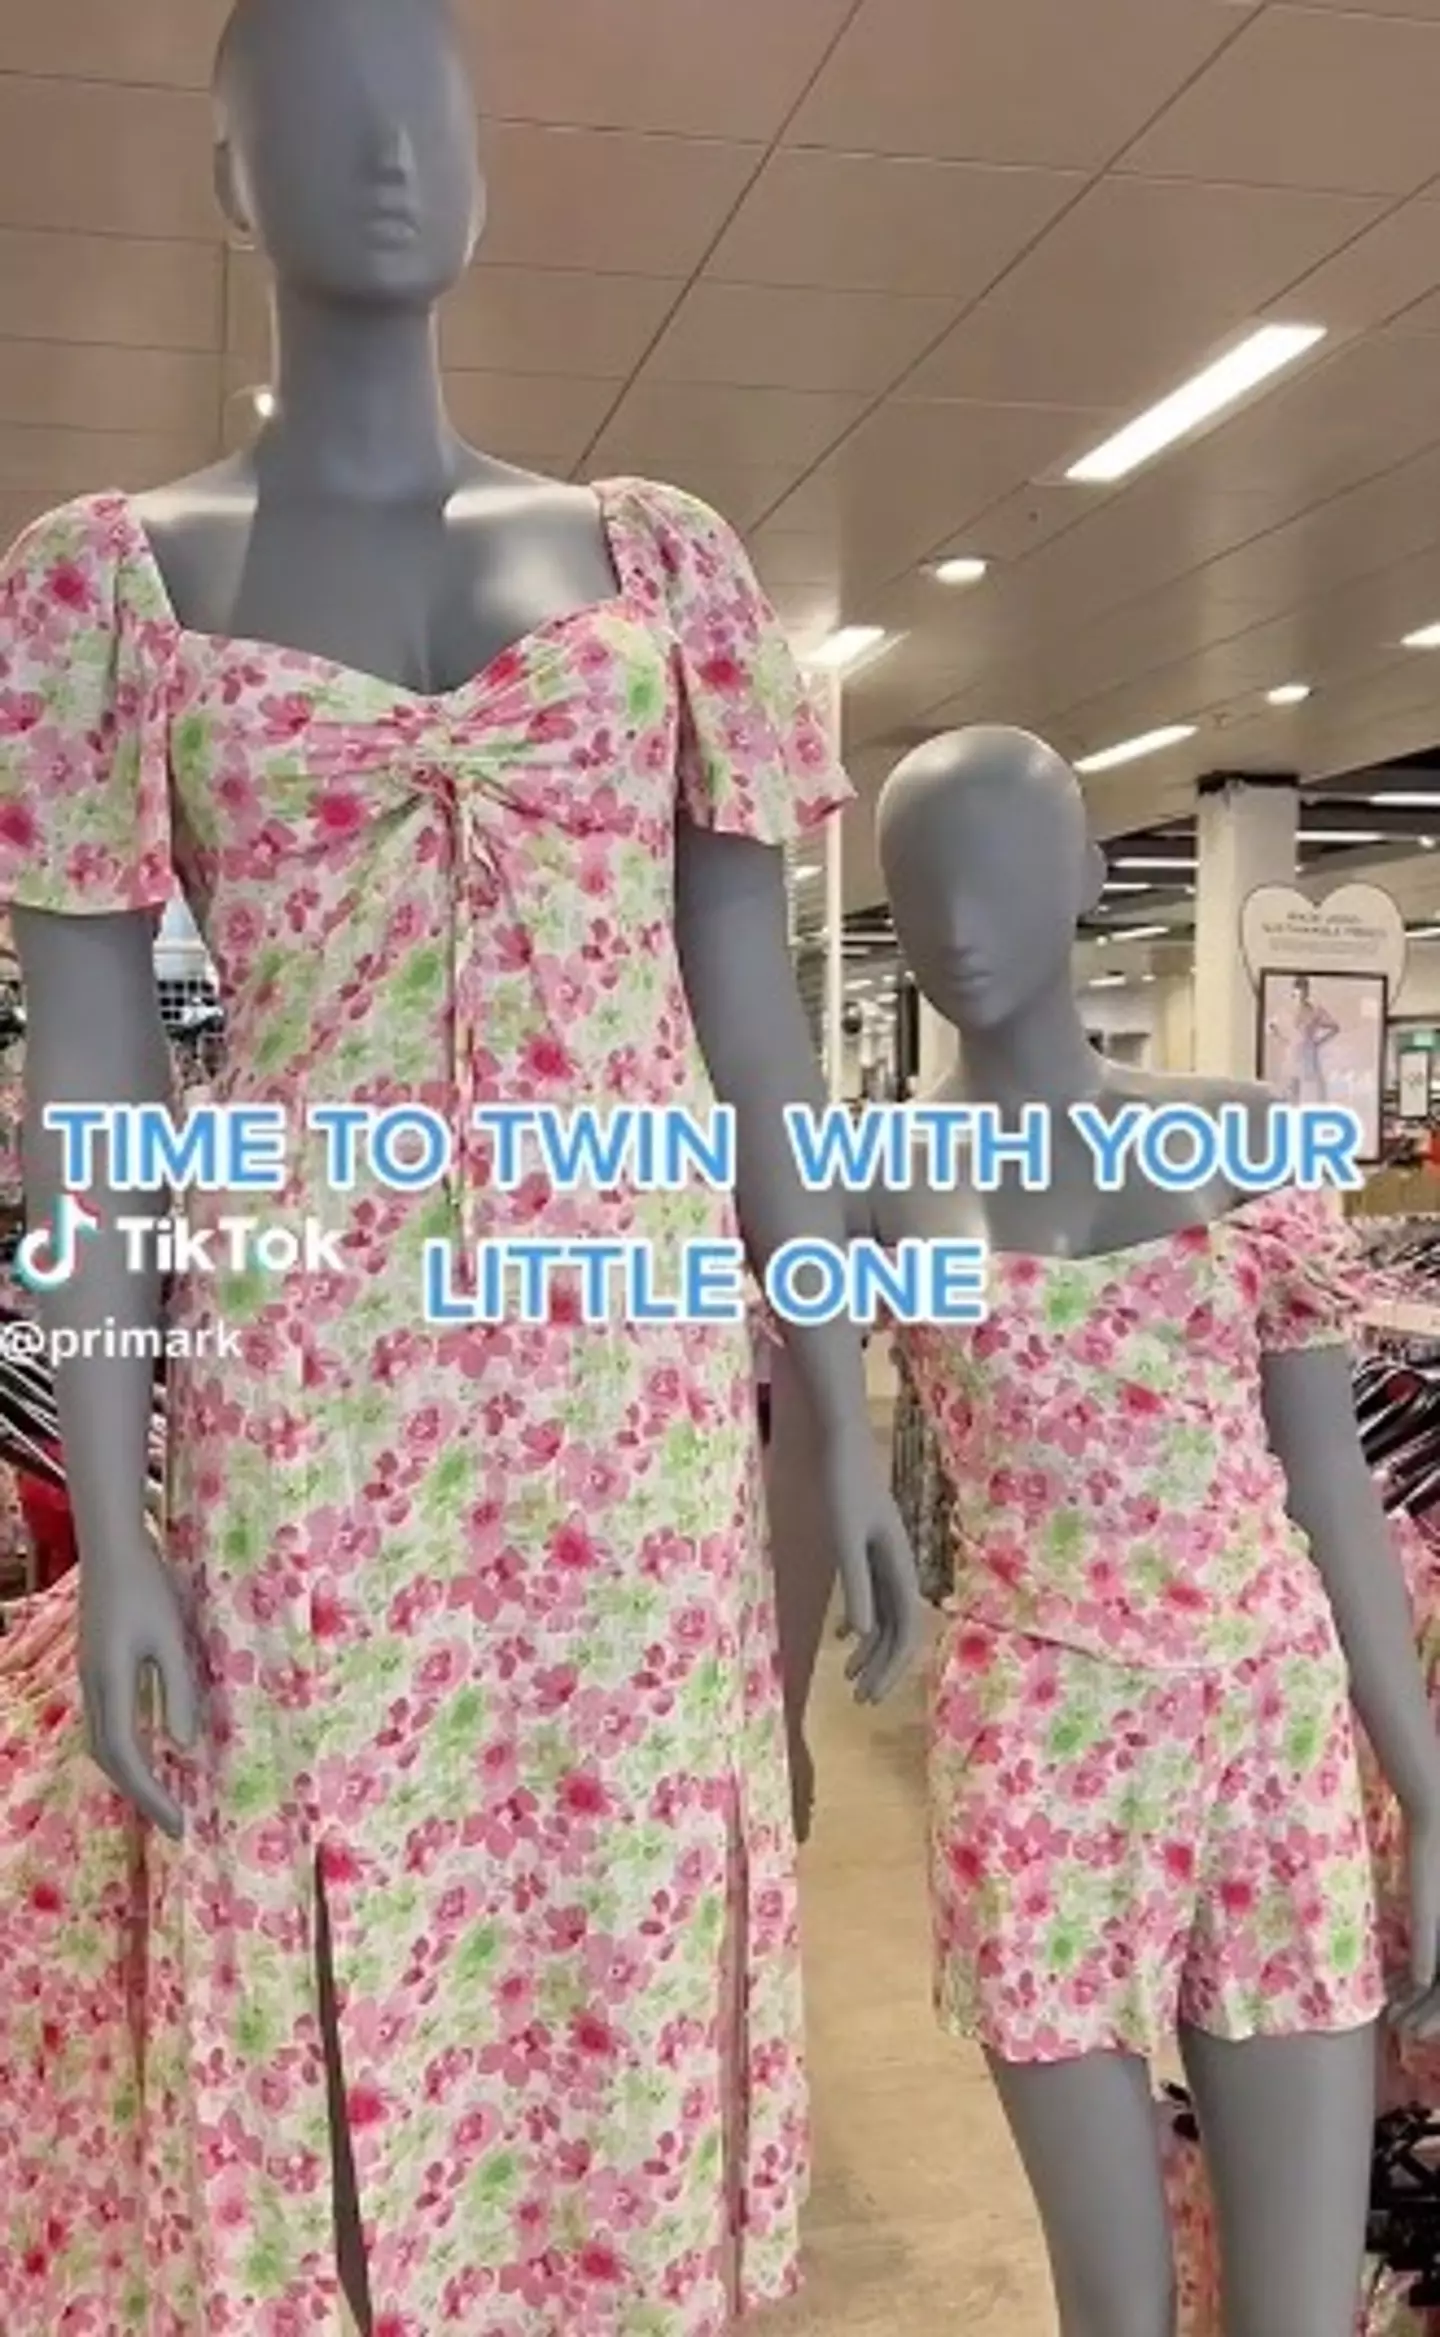 Some have urged Primark to rethink their new clothing line of matching dresses for mothers and daughters.